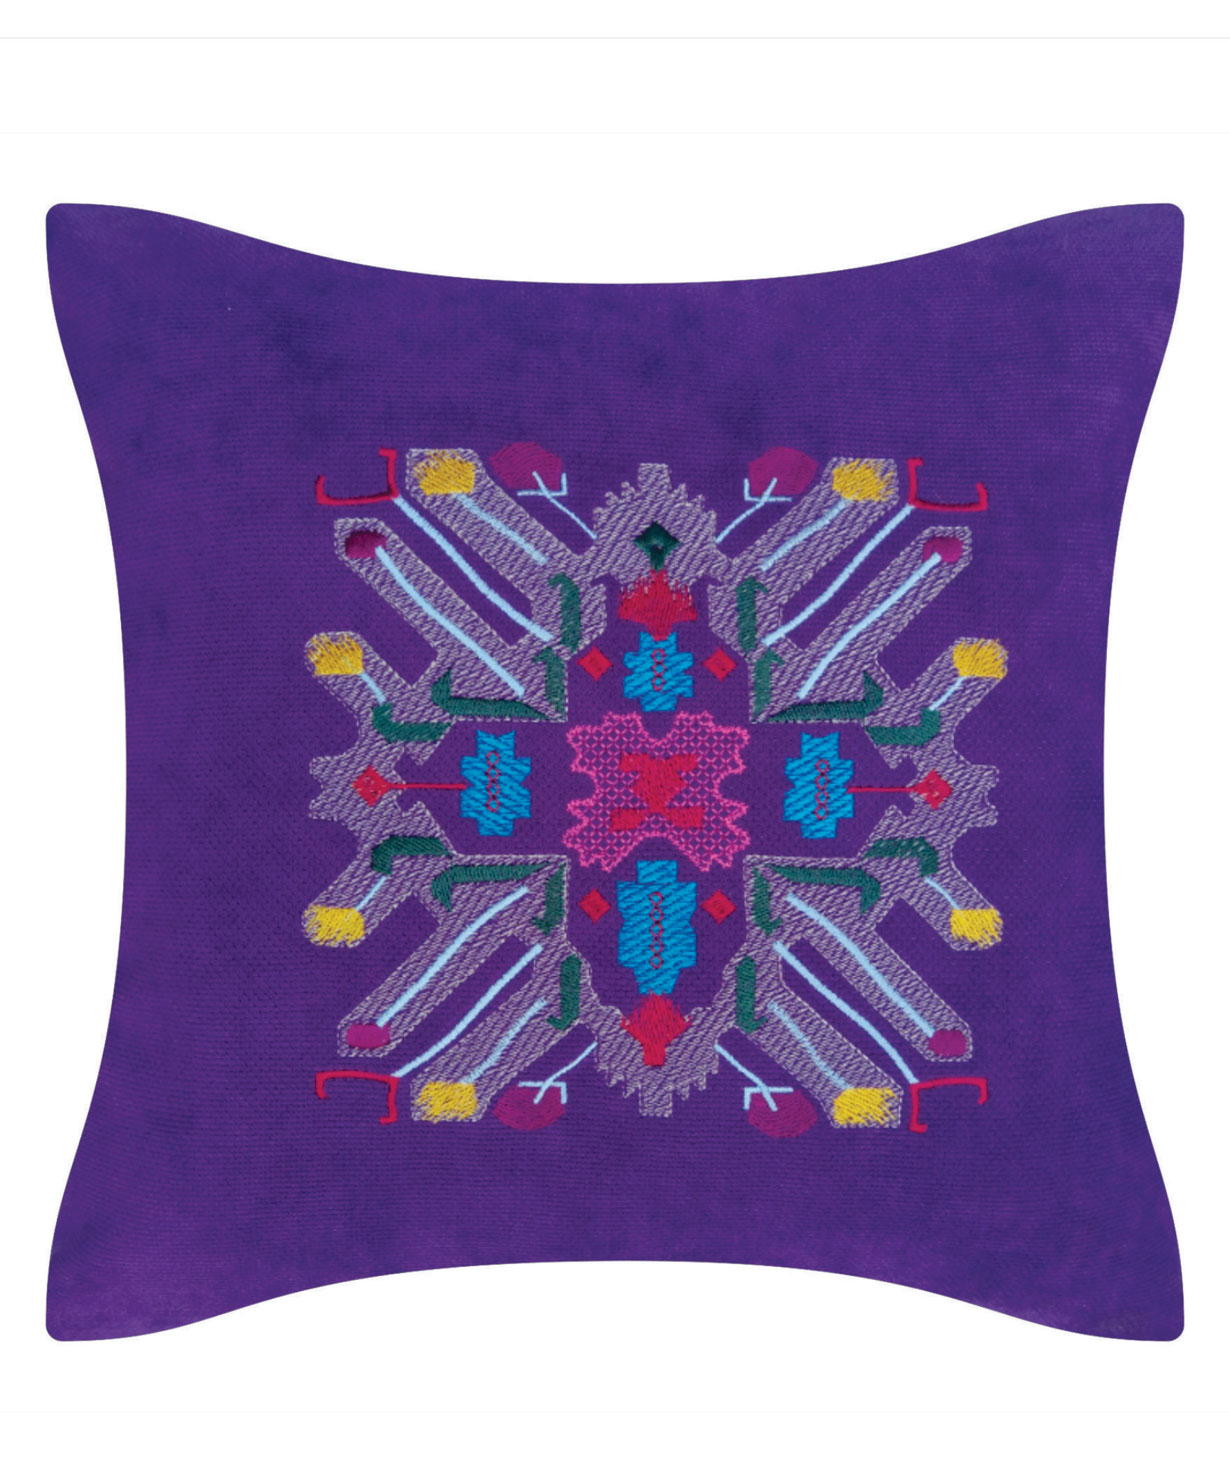 Pillow `Miskaryan heritage` embroidered with Armenian ornament №20